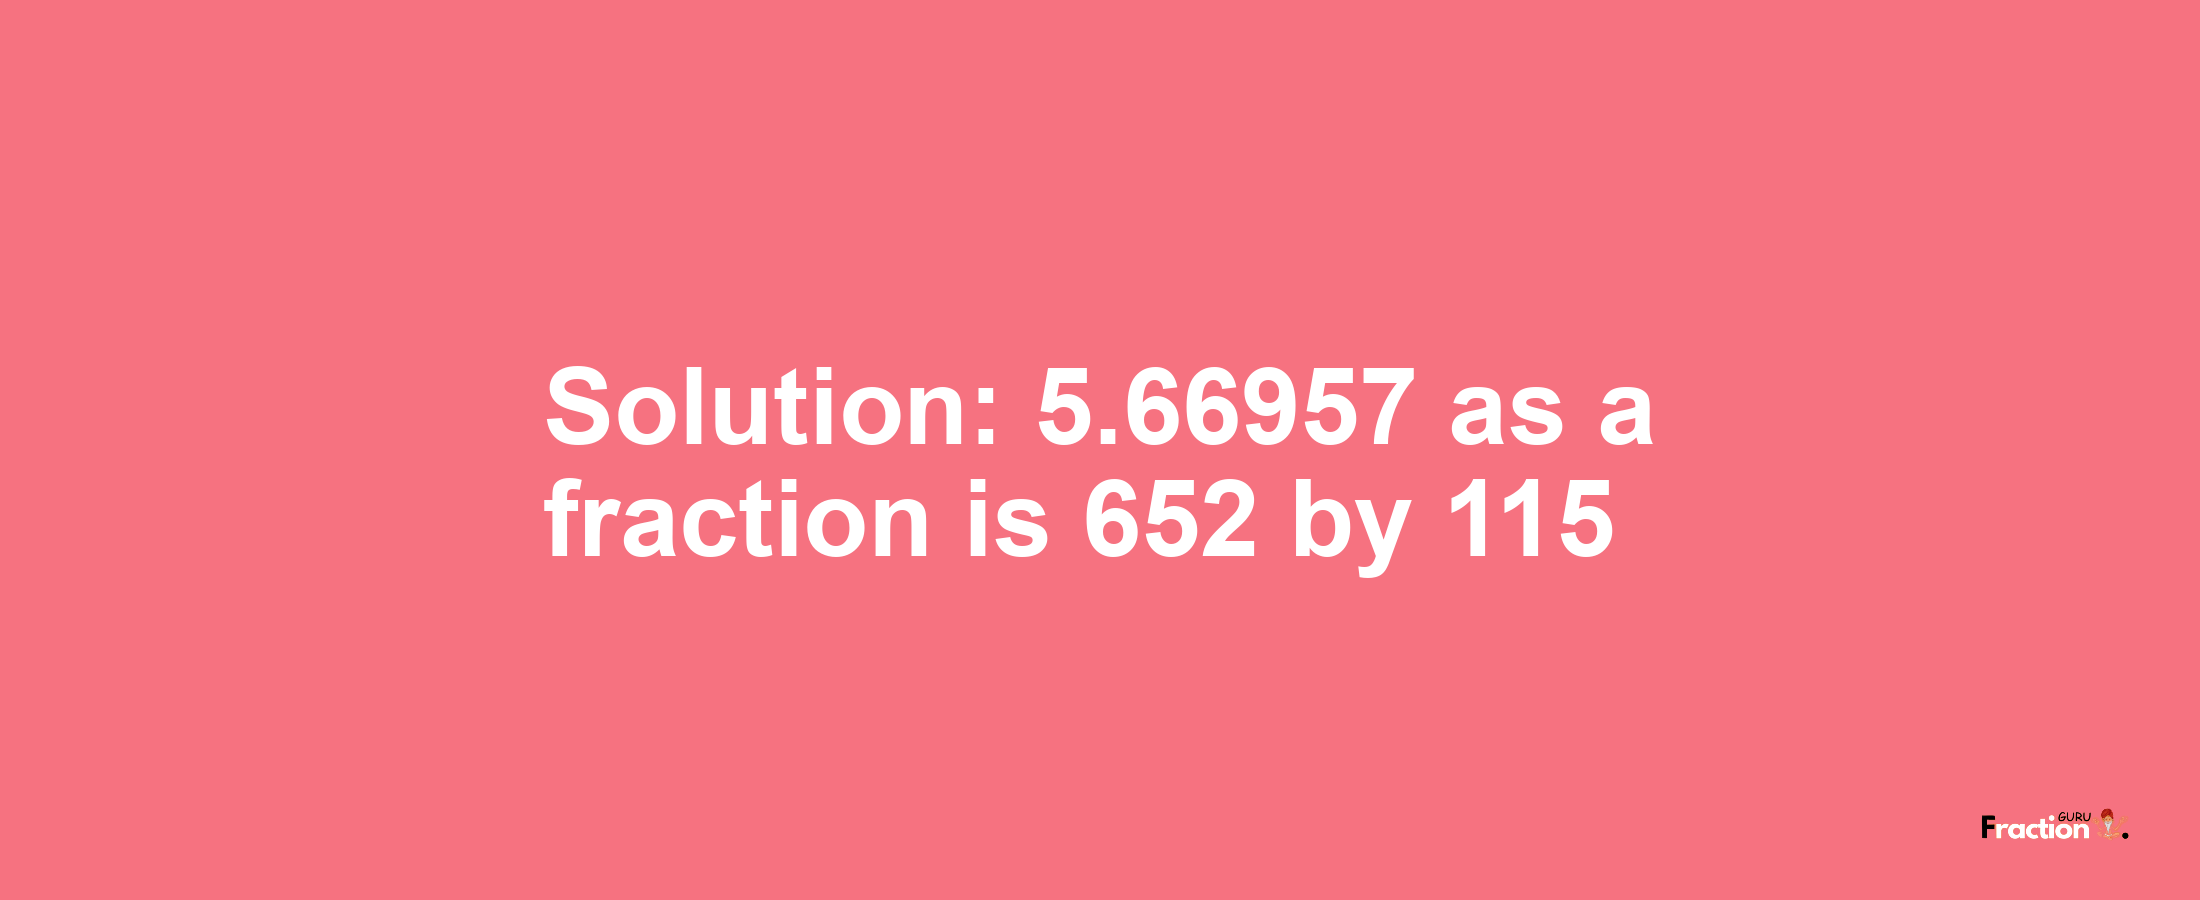 Solution:5.66957 as a fraction is 652/115